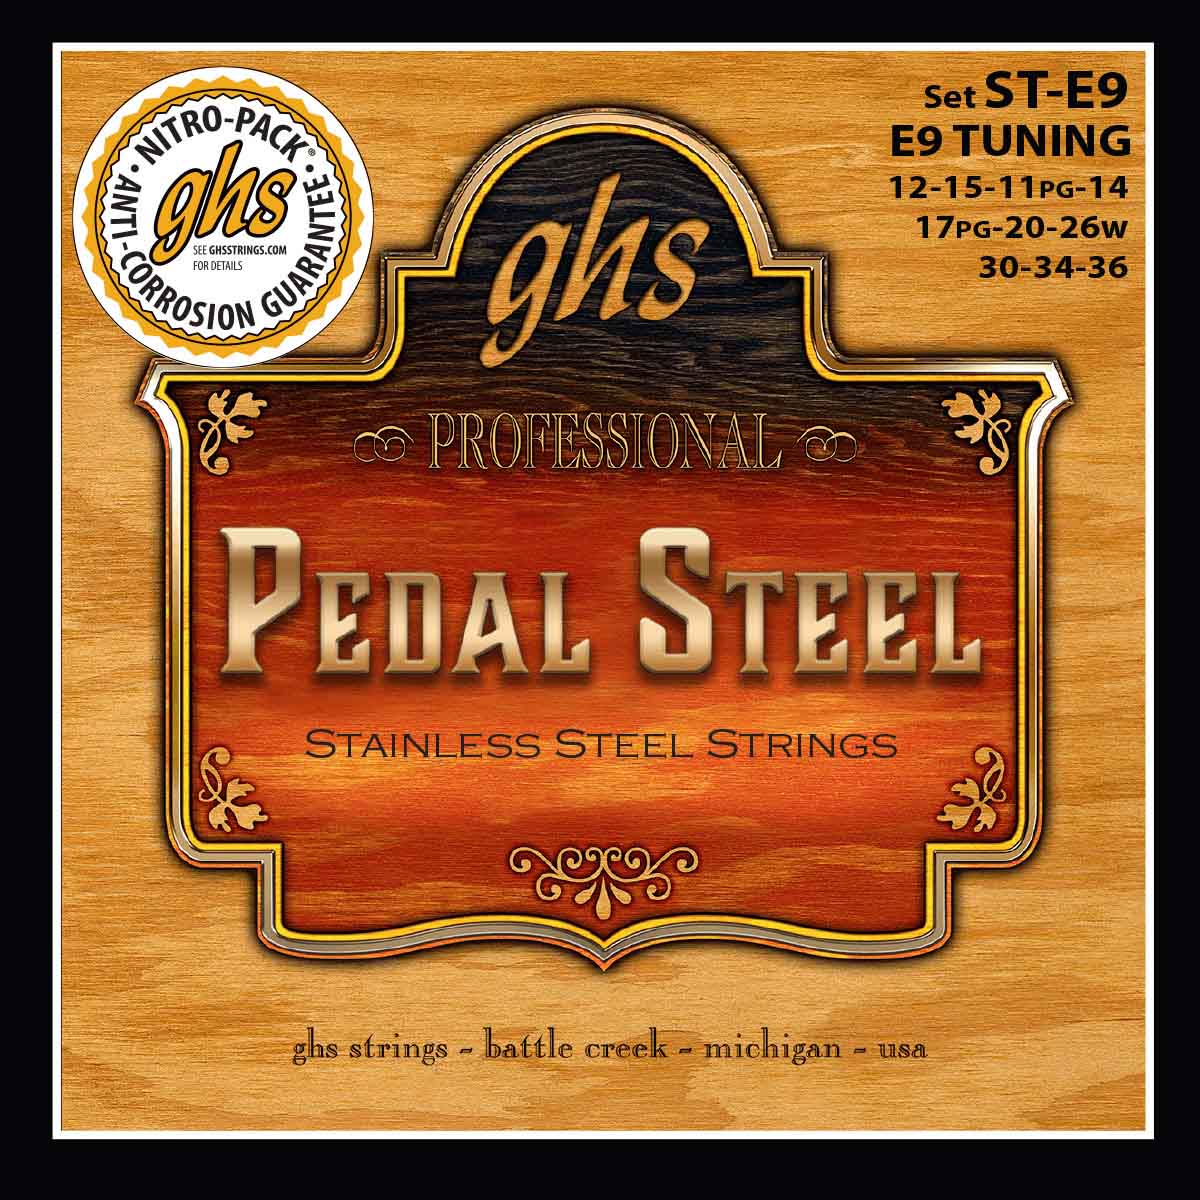 GHS PEDAL STEEL STAINLESS STEEL ST E9